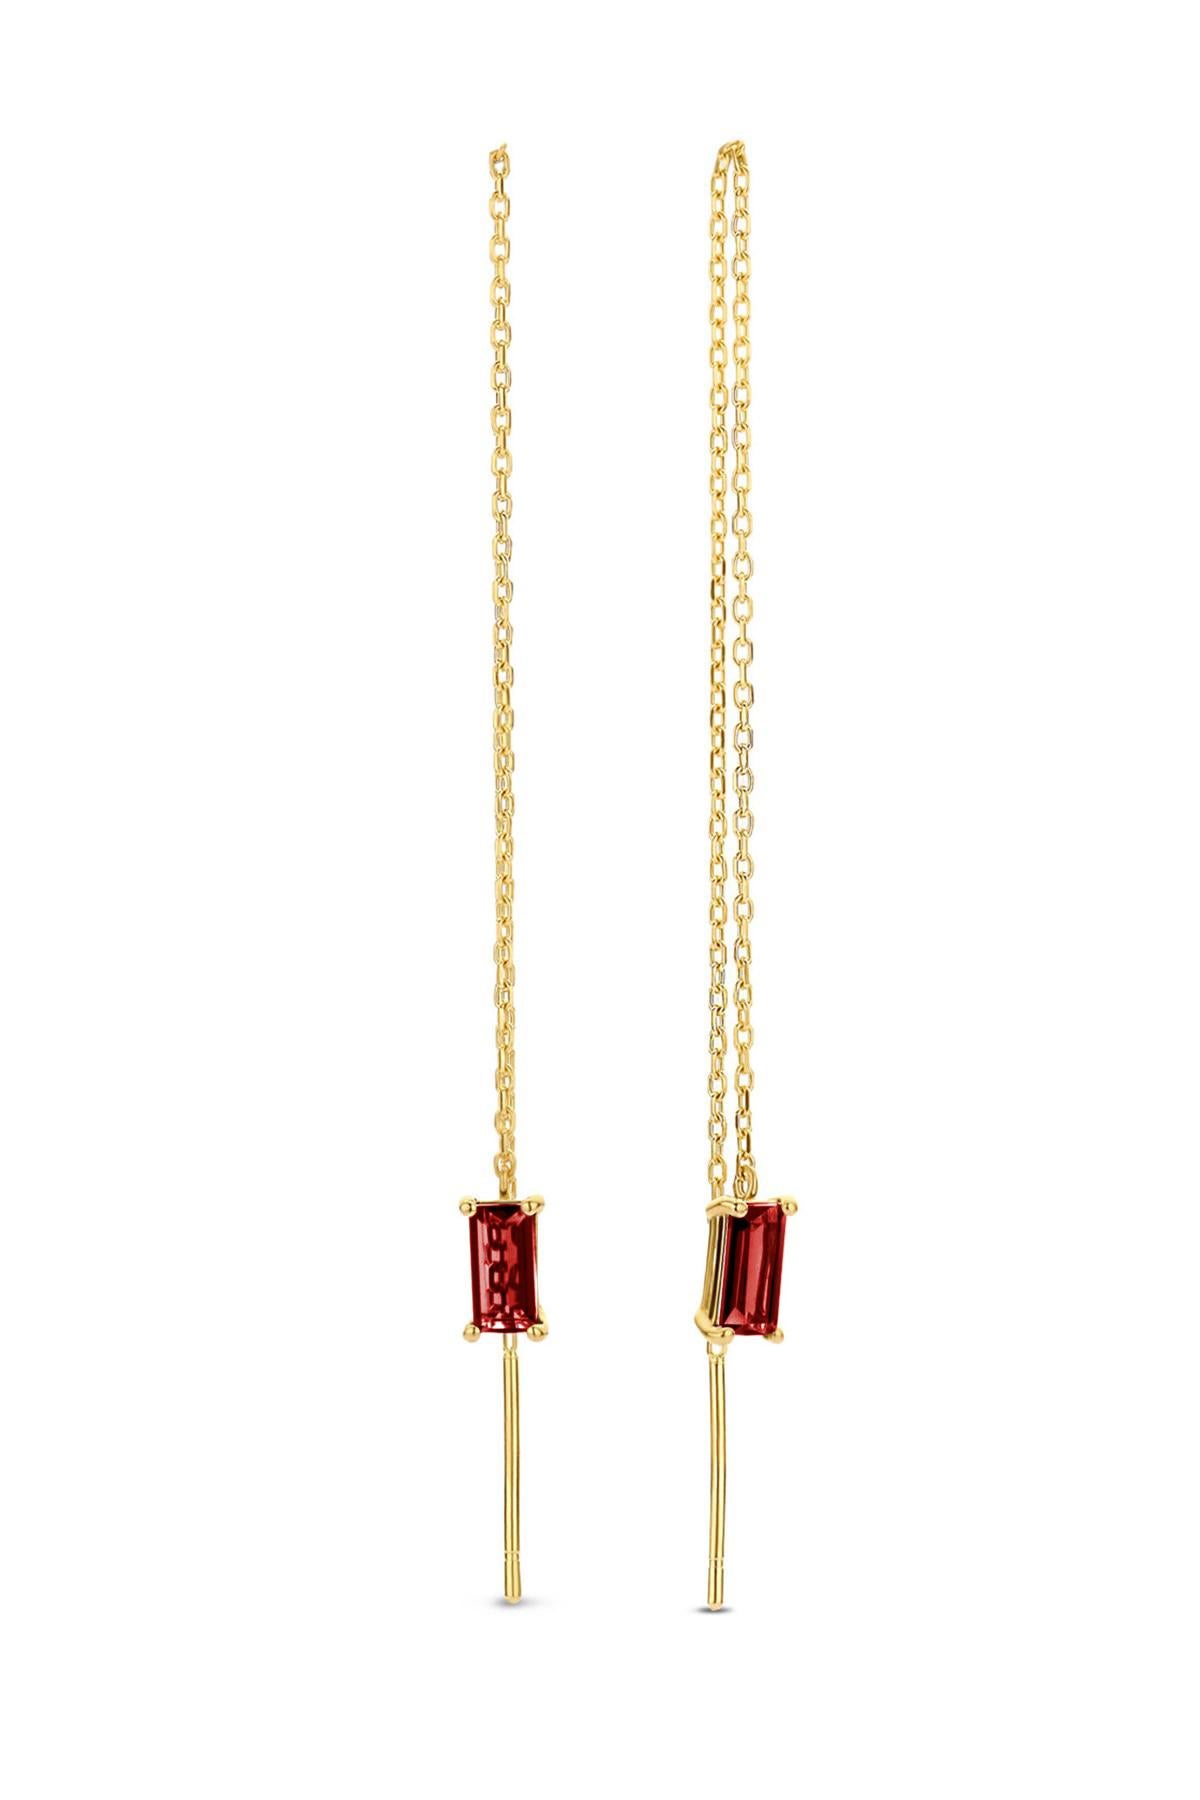 Modern 14k solid gold drop earrings with garnets.  For Sale